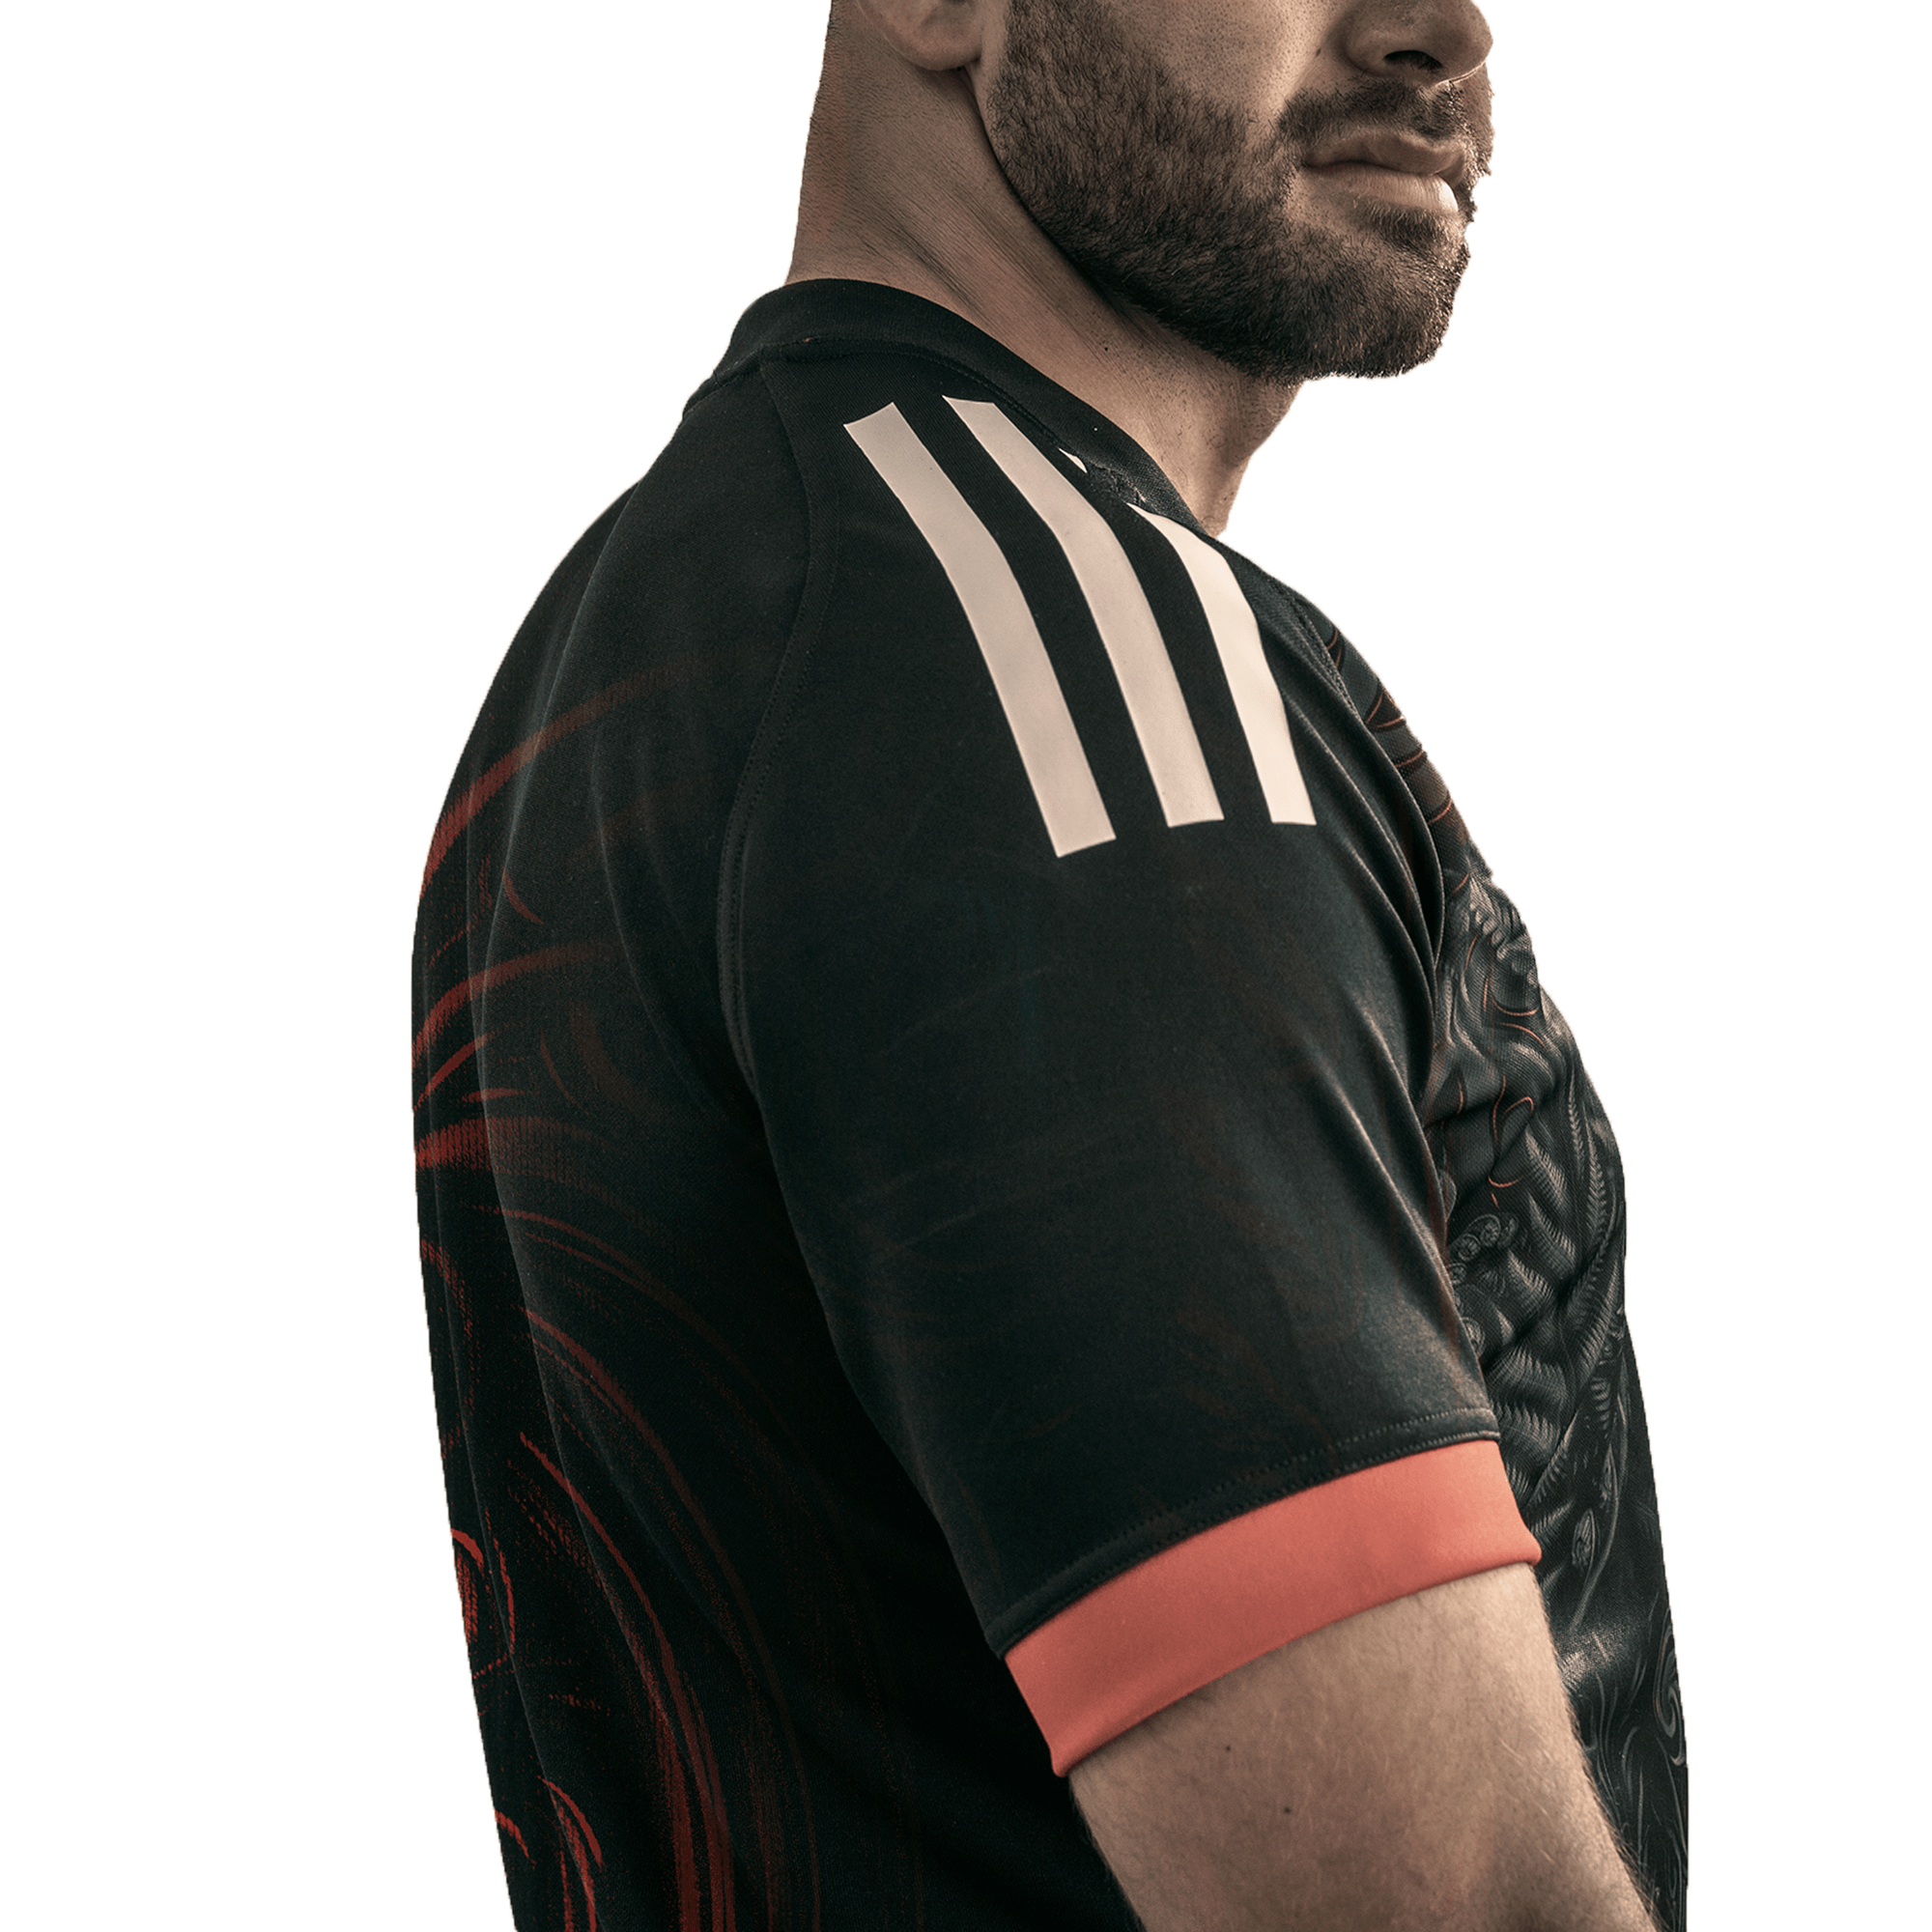 Māori All Blacks Home Supporters Jersey by Adidas